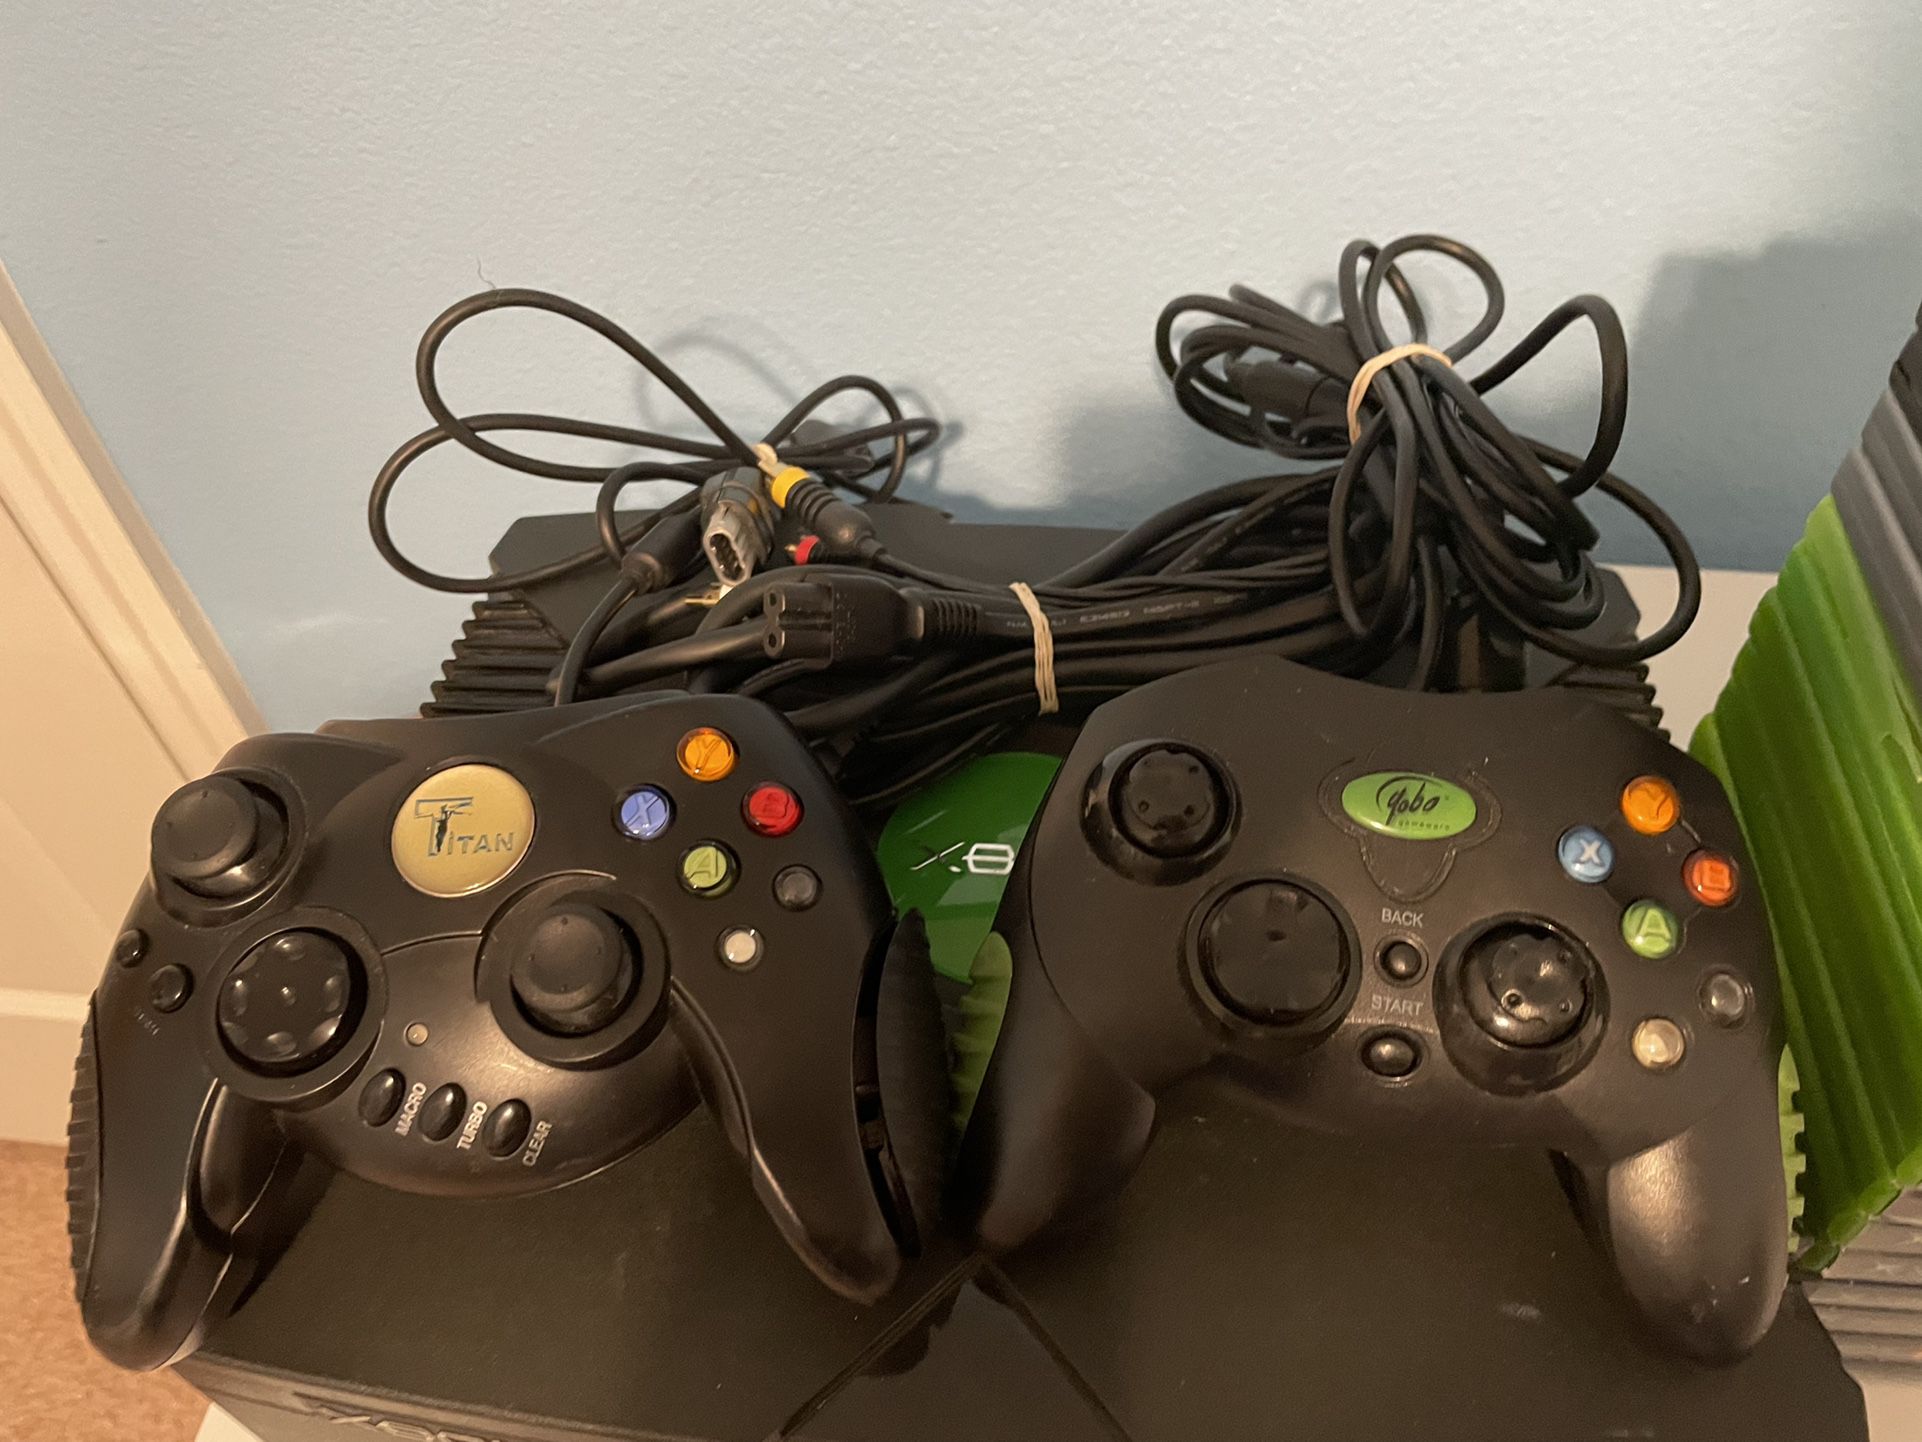 Original Xbox with 2 Controllers and Cables- Tested And Working!